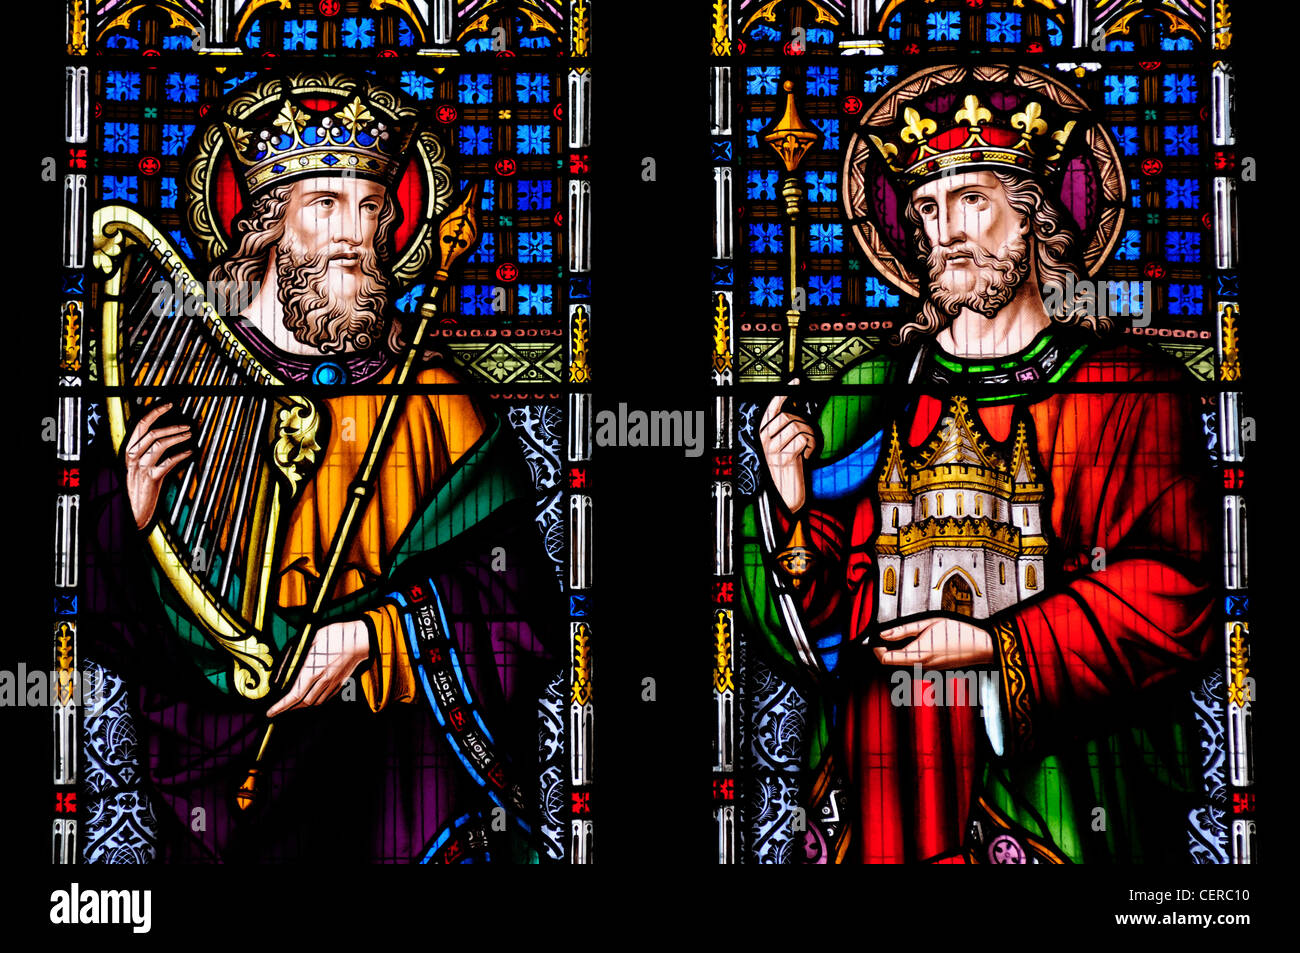 King David and King Solomon featured in a stained glass window in Peterborough Cathedral. Stock Photo